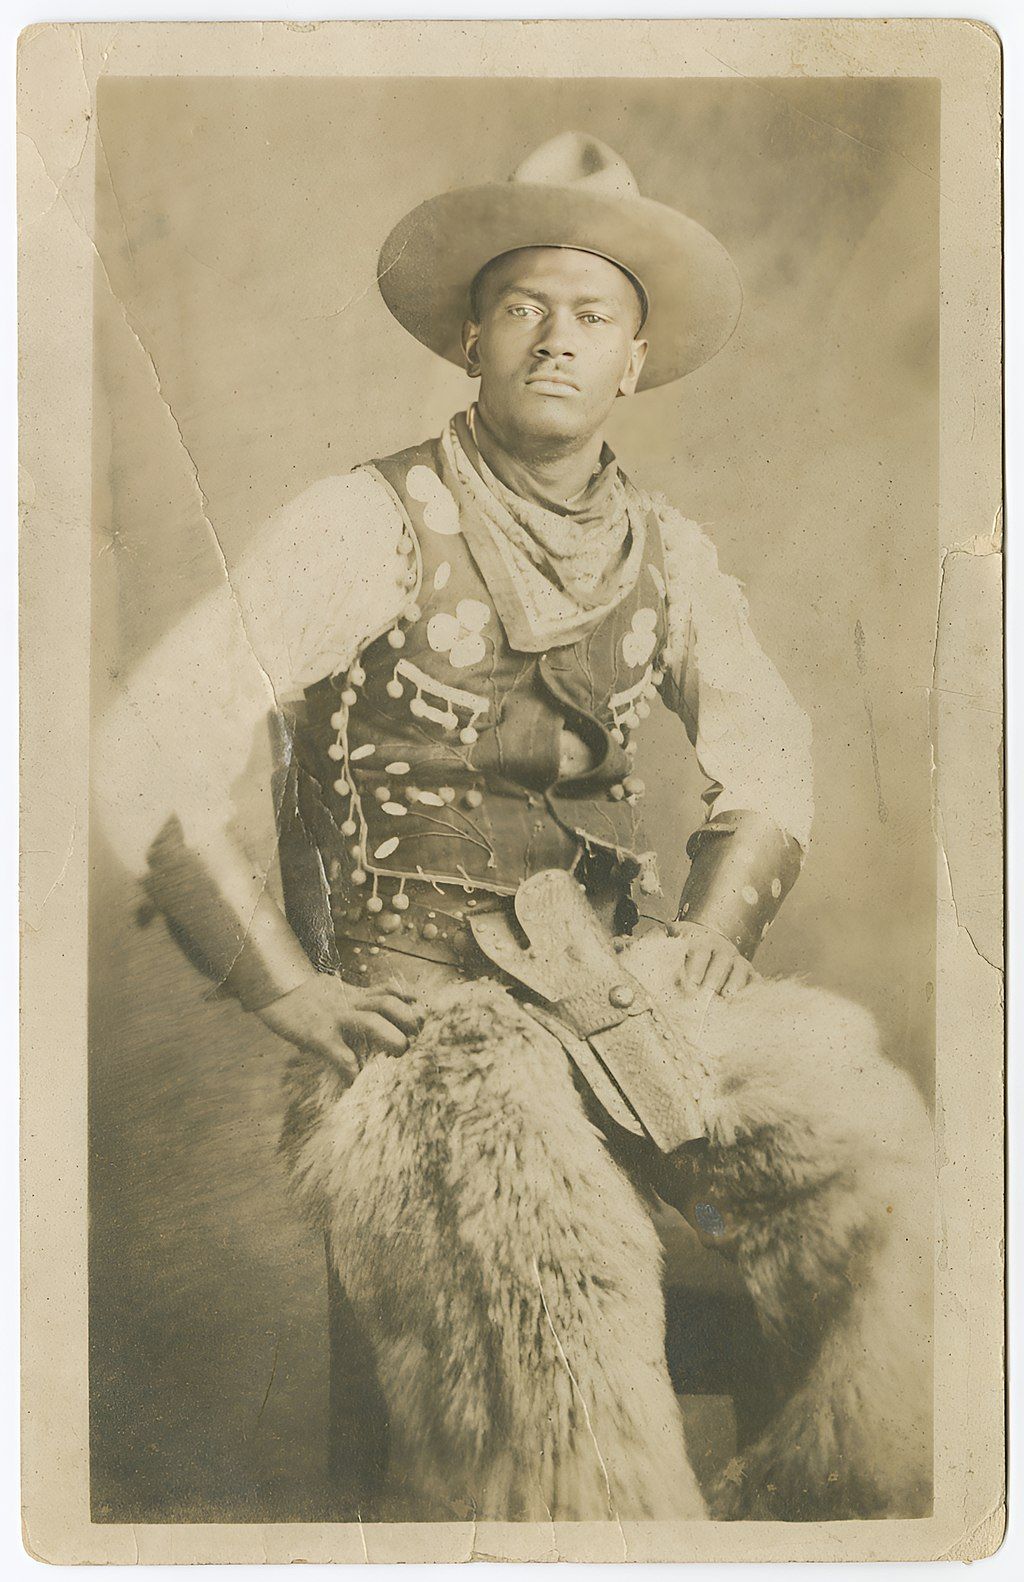 An unidentified early 20th-century Black cowboy